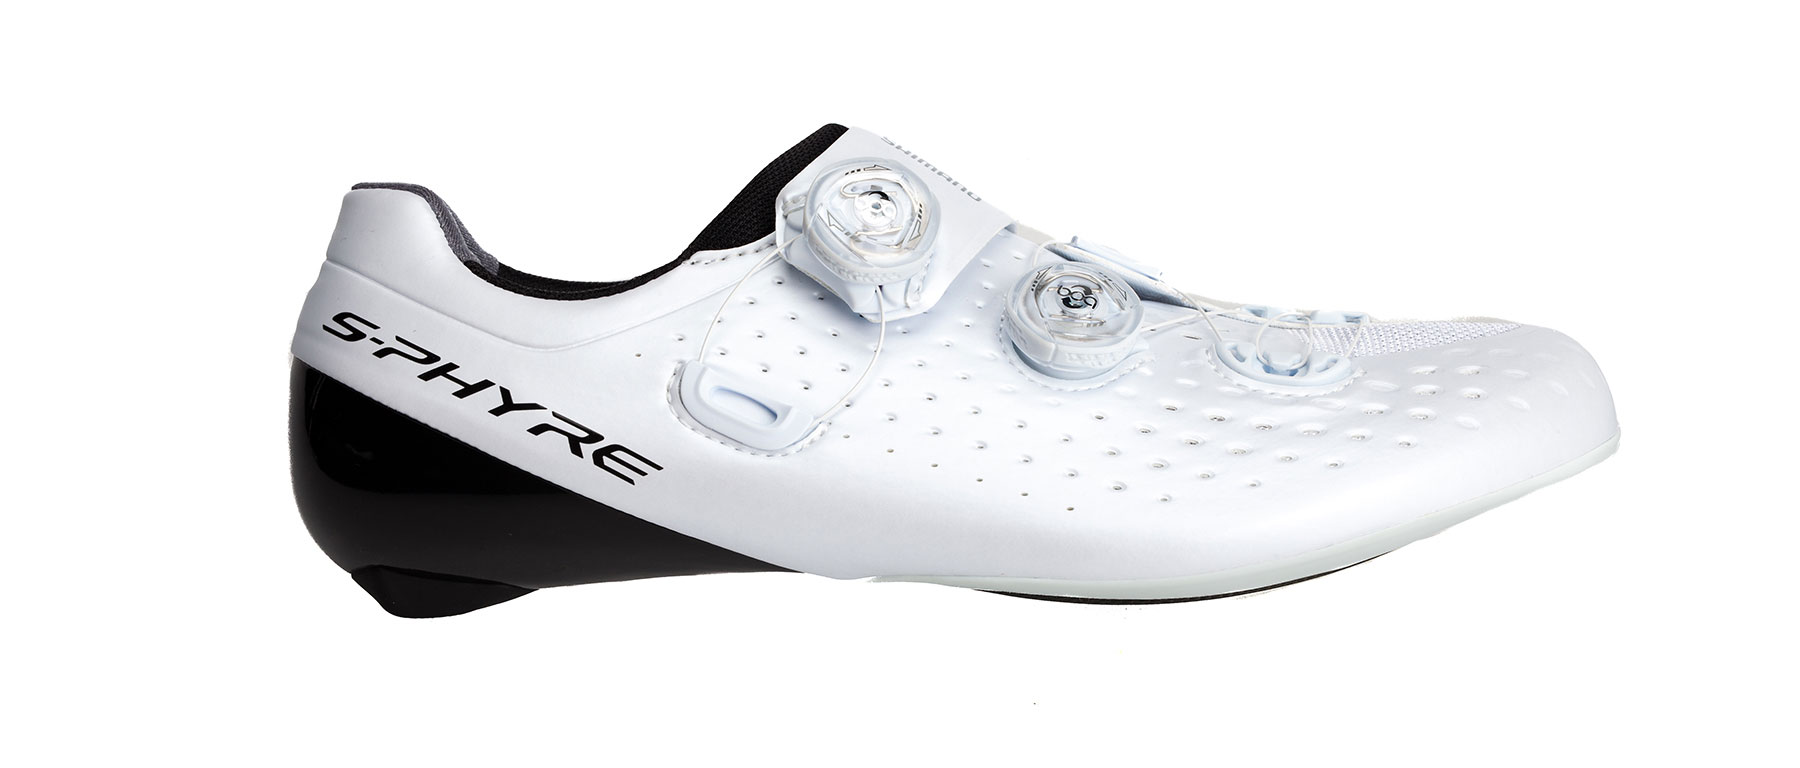 Shimano SH-RC9 S-Phyre Road Shoes 2017 Excel Sports | Shop Online